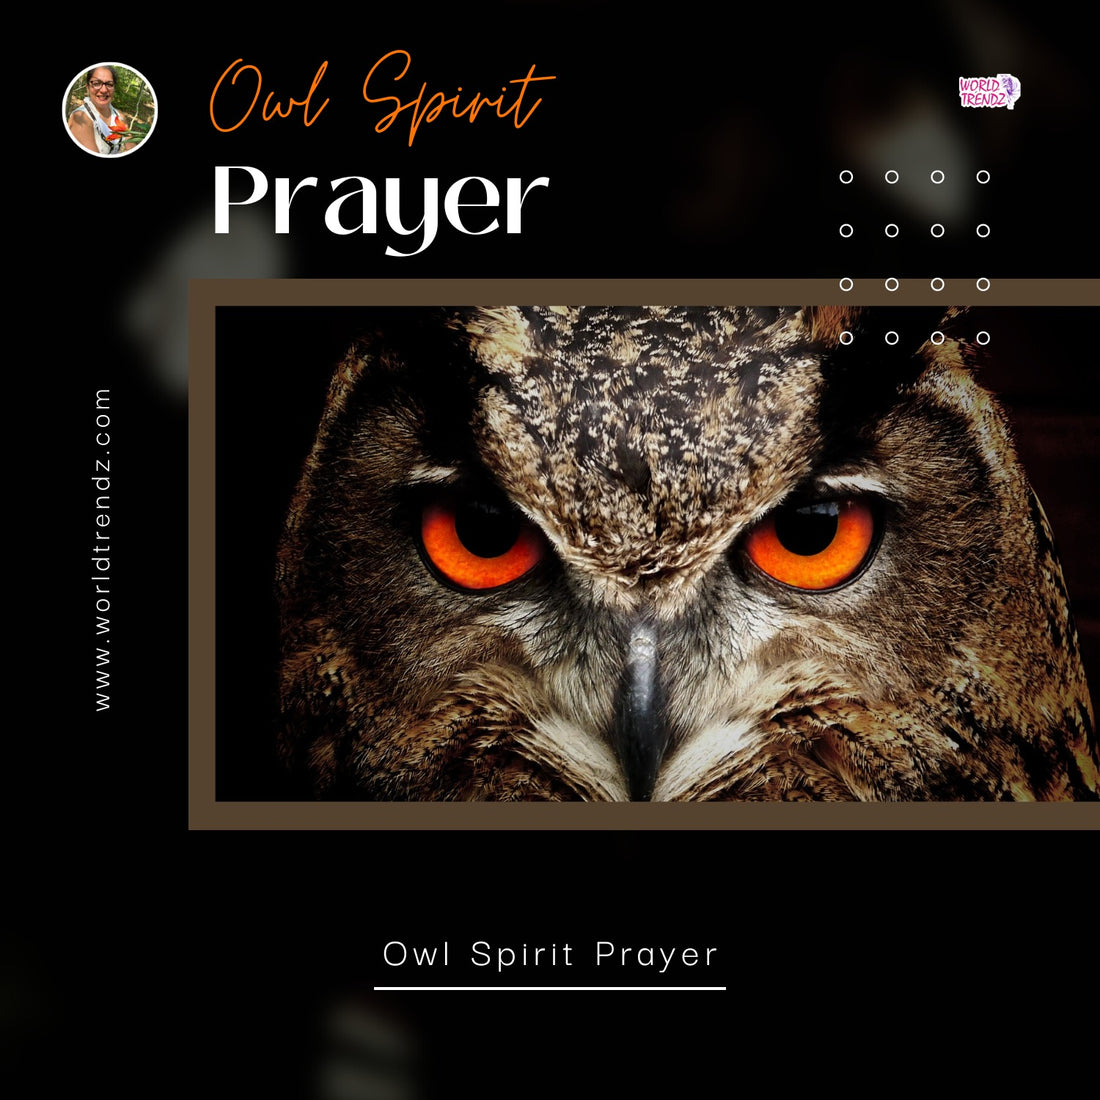 Things Most People Don't Know About Owl Spirit Prayer